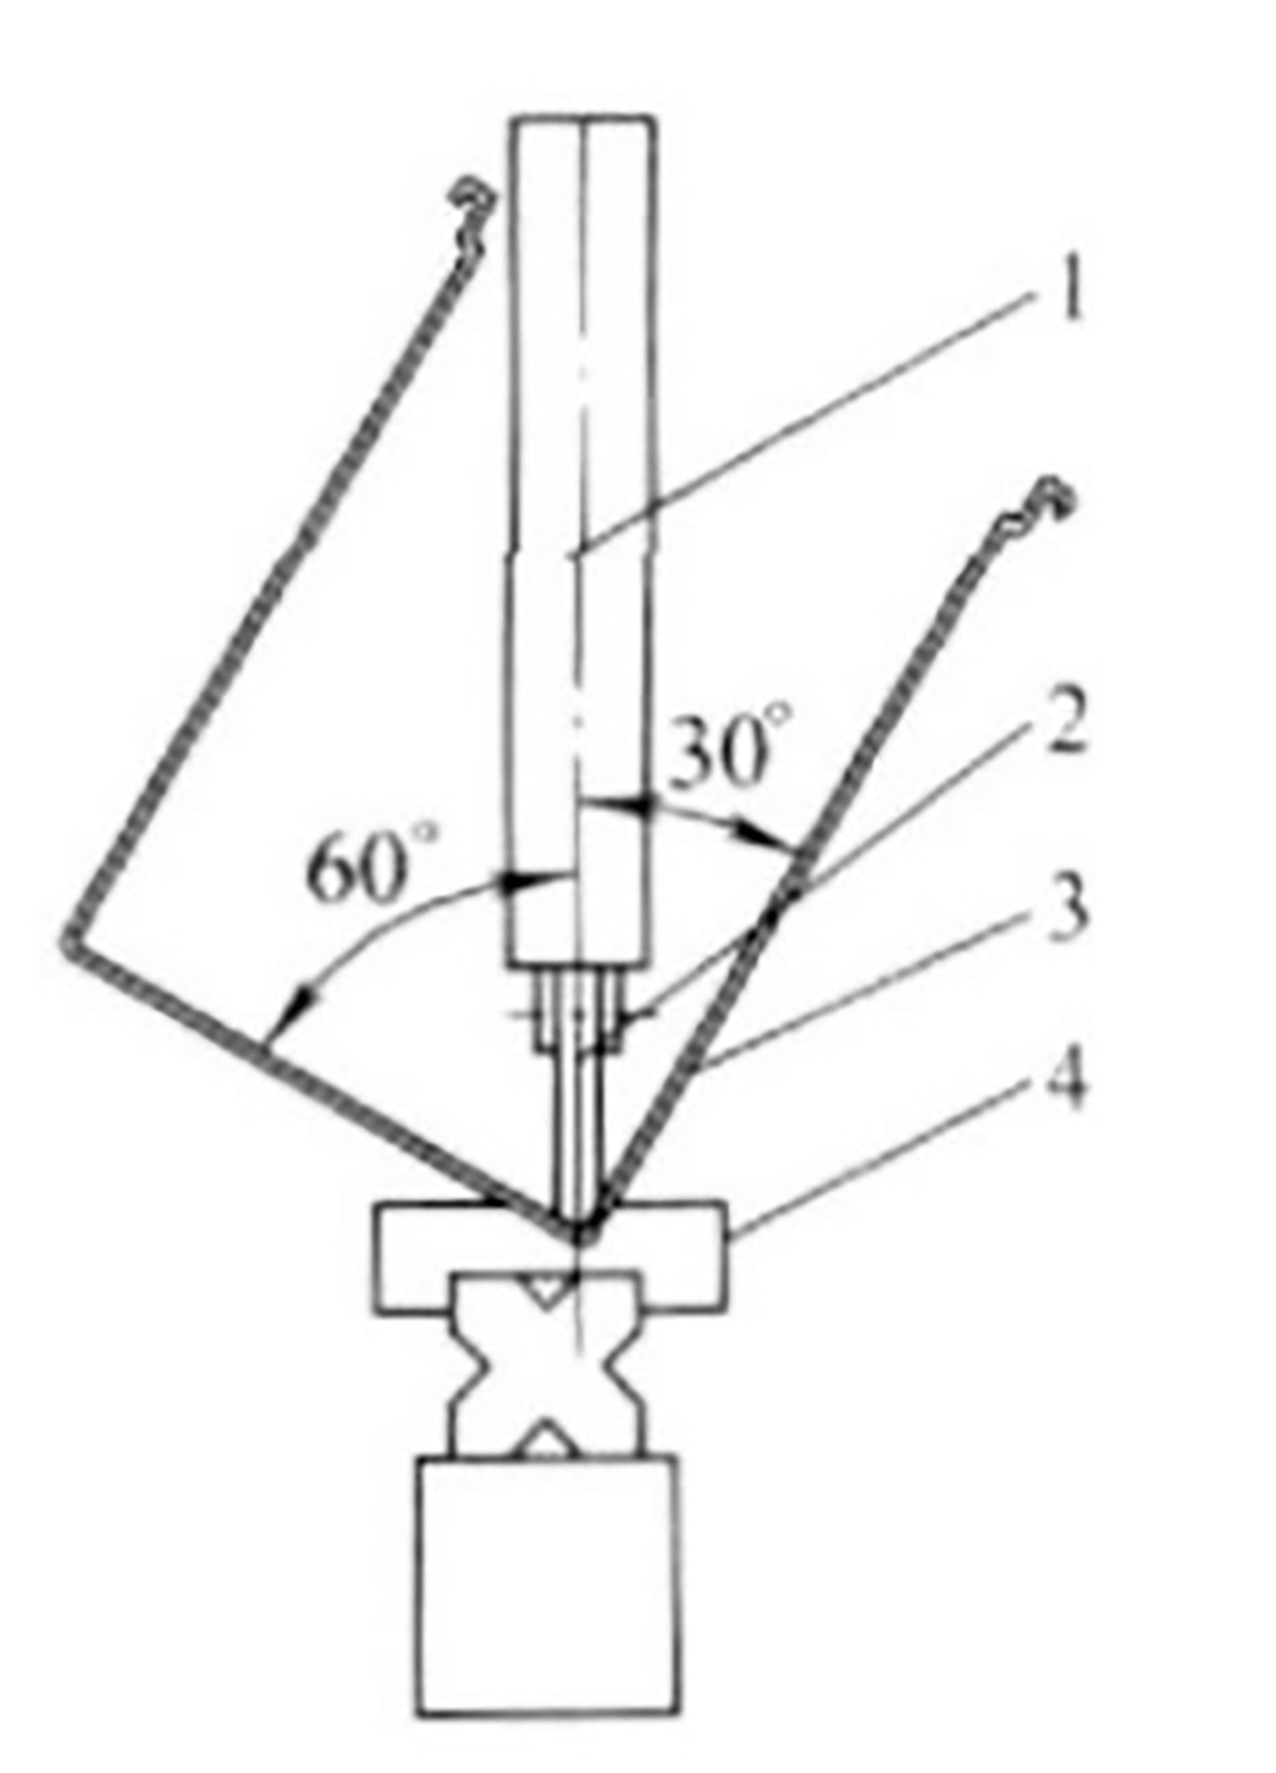 Fig. 6 The bending upper and lower die